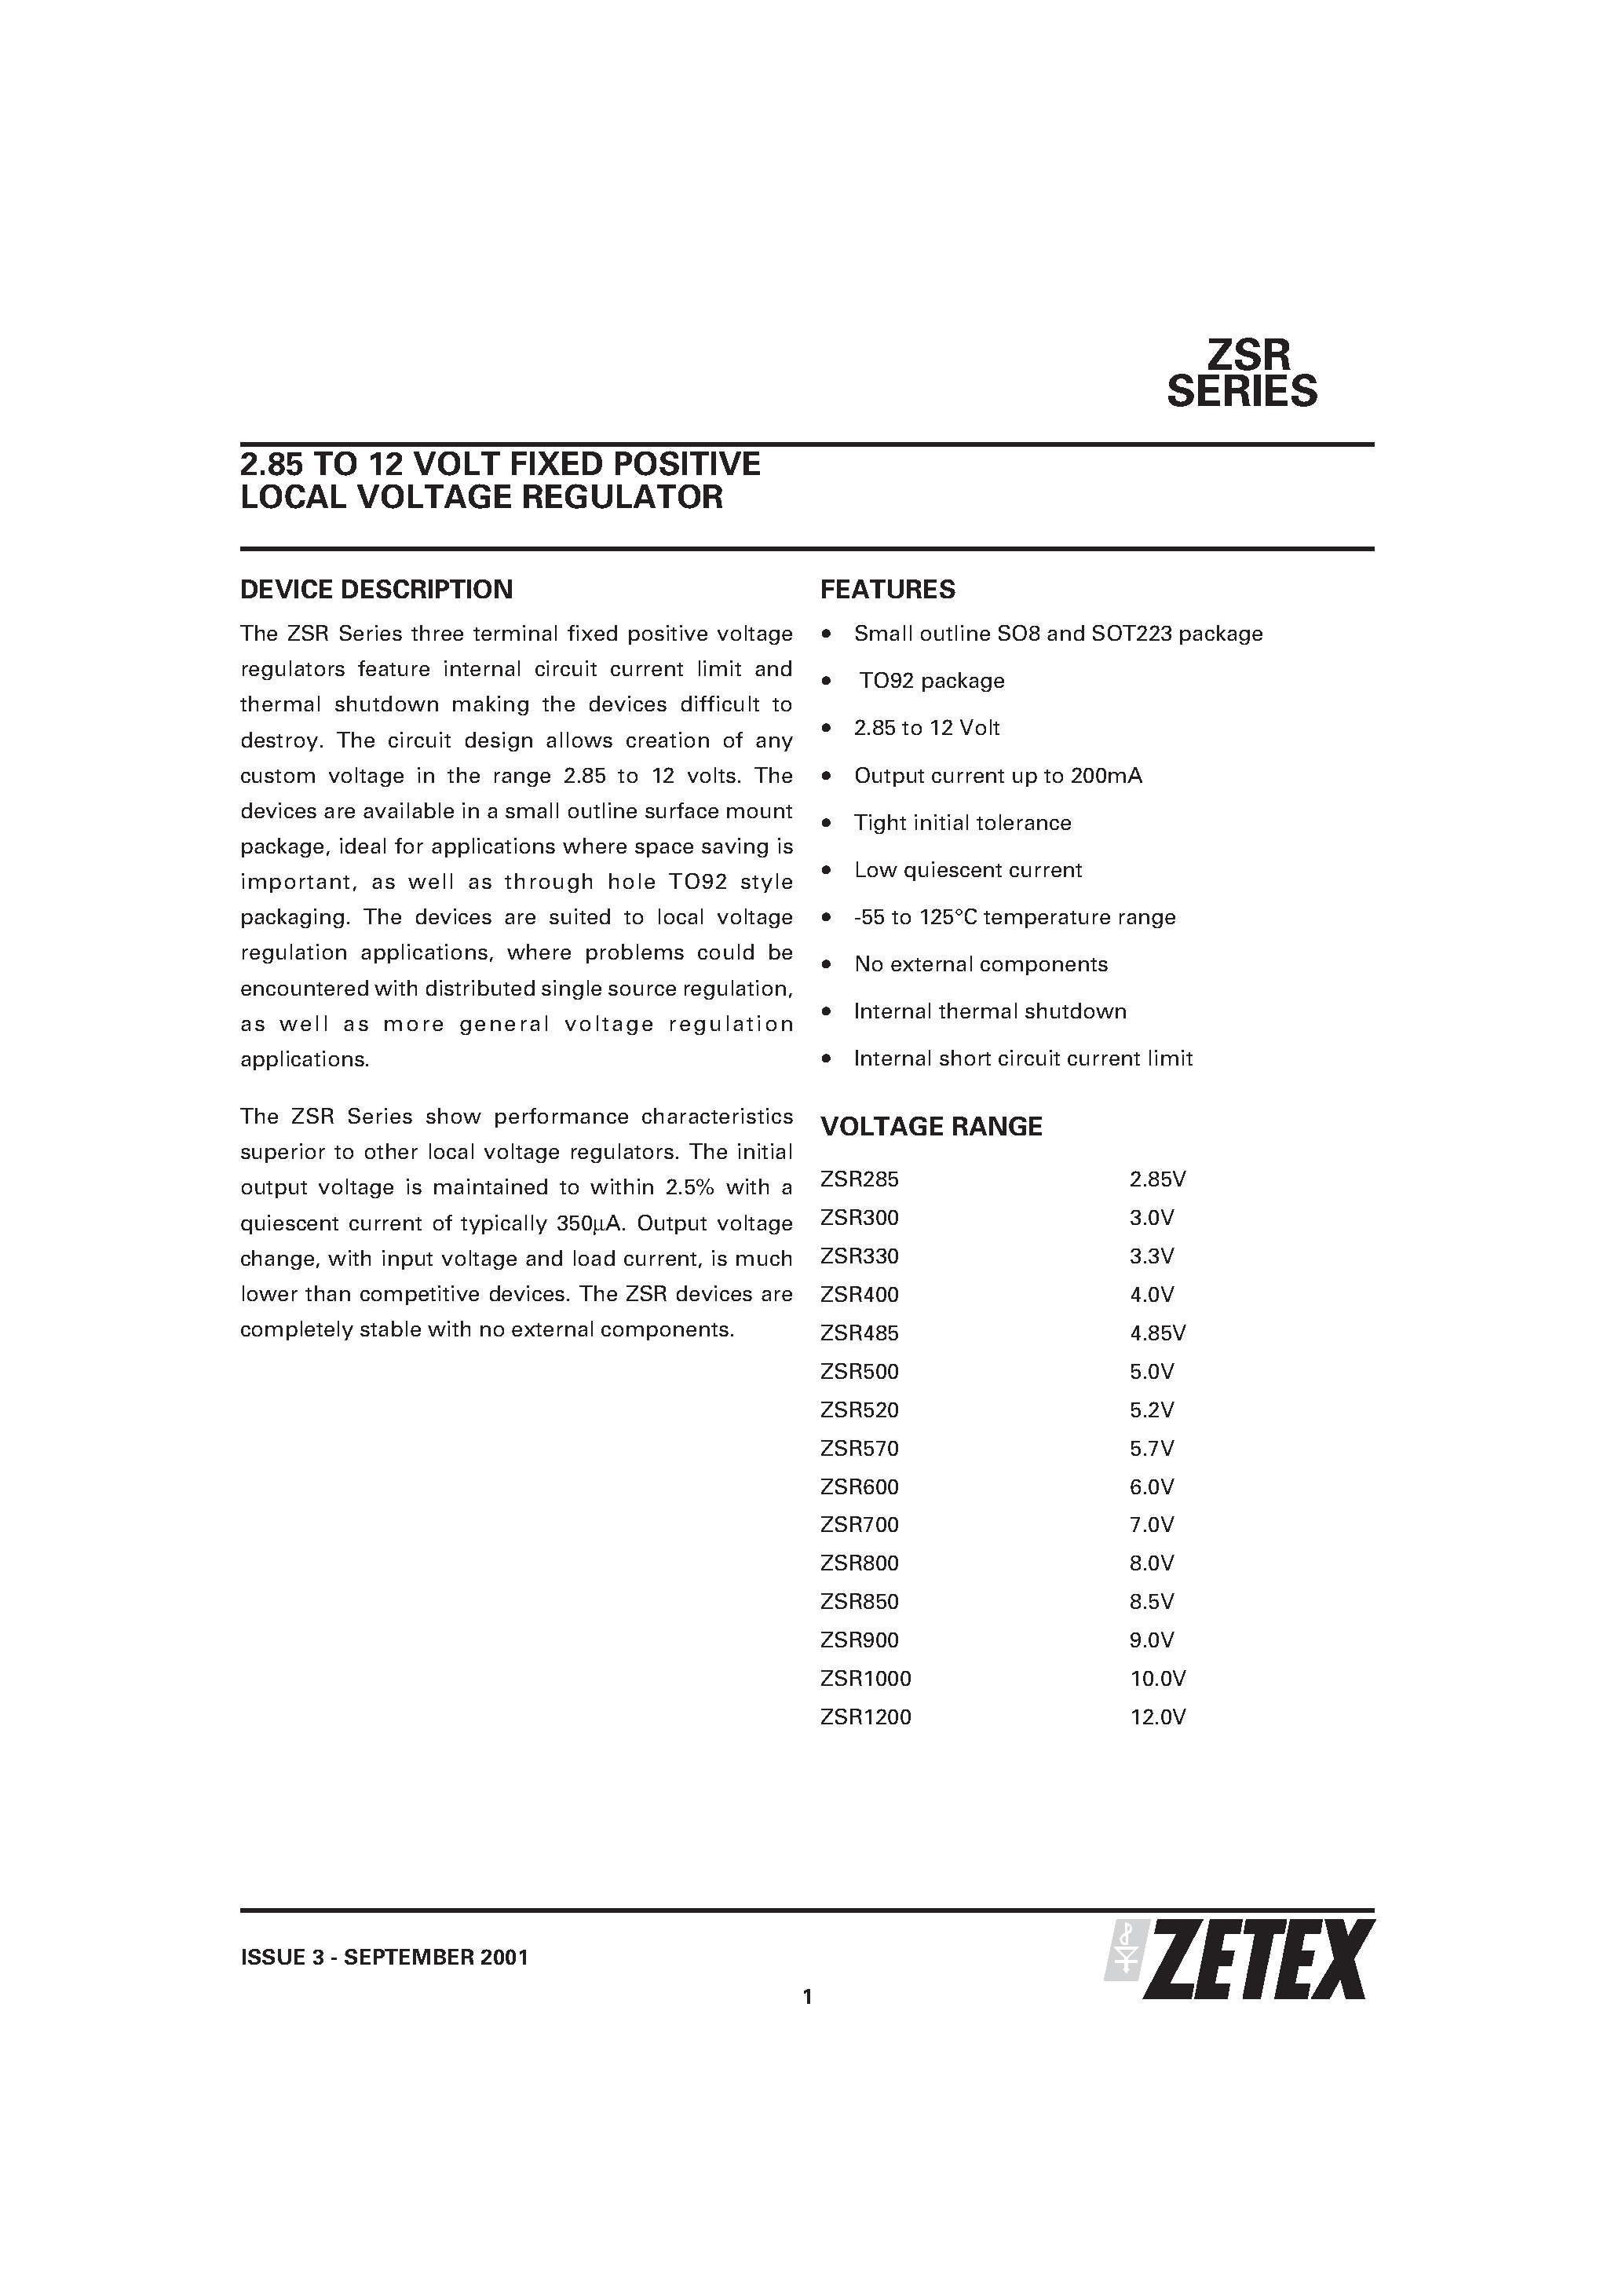 Datasheet ZSR600G - 2.85 TO 12 VOLT FIXED POSITIVE LOCAL VOLTAGE REGULATOR page 1